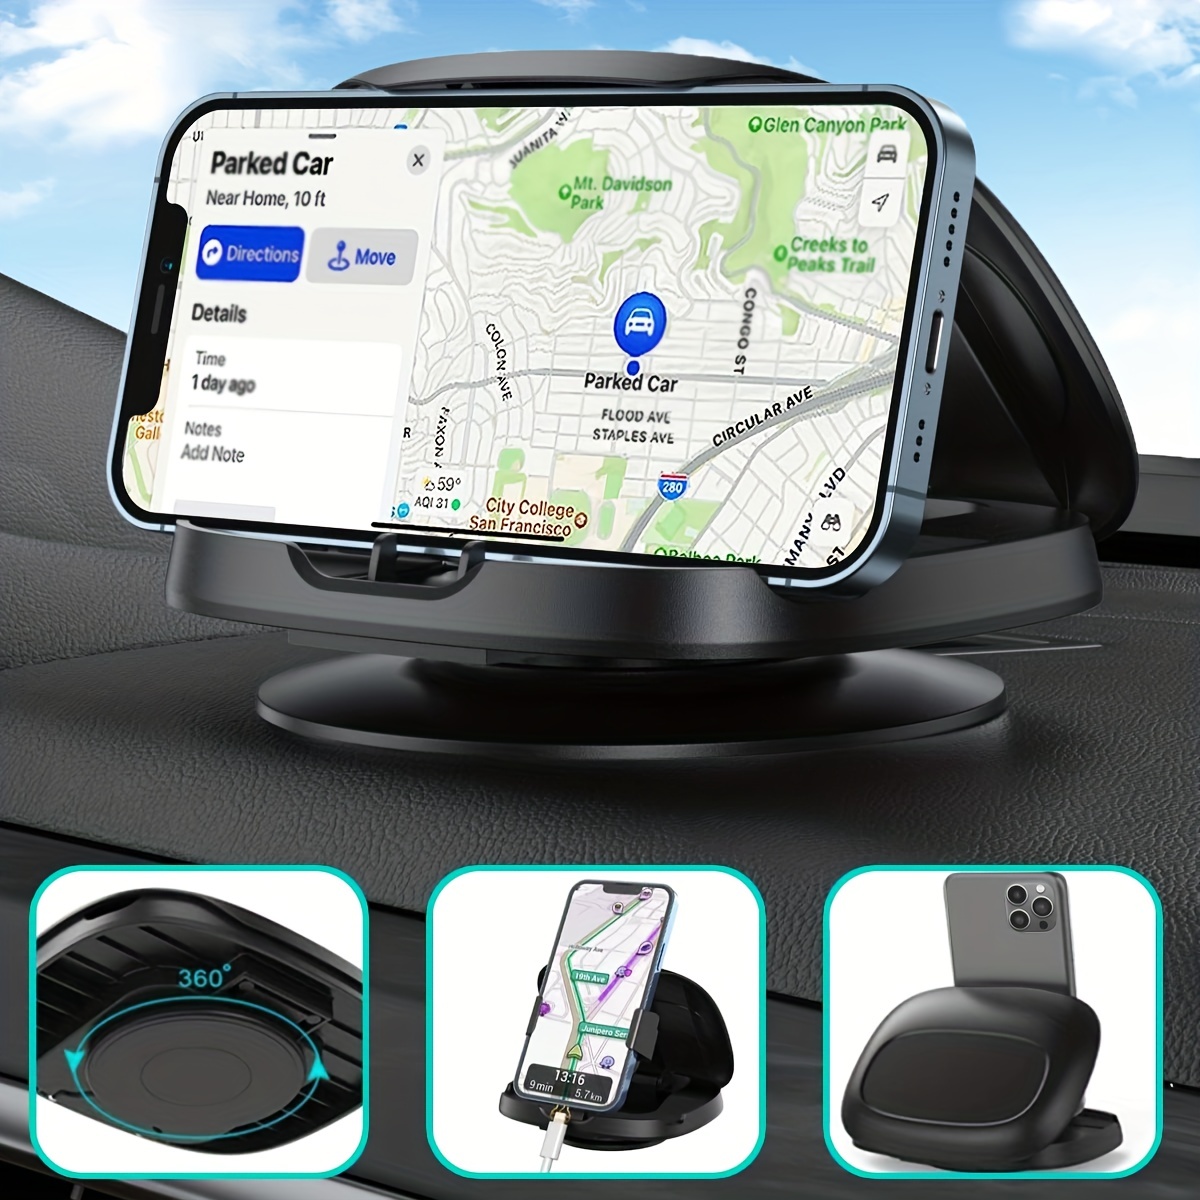 

Secure Your Phone In Style - 360° Rotating Car Phone Mount For Iphone & Android!